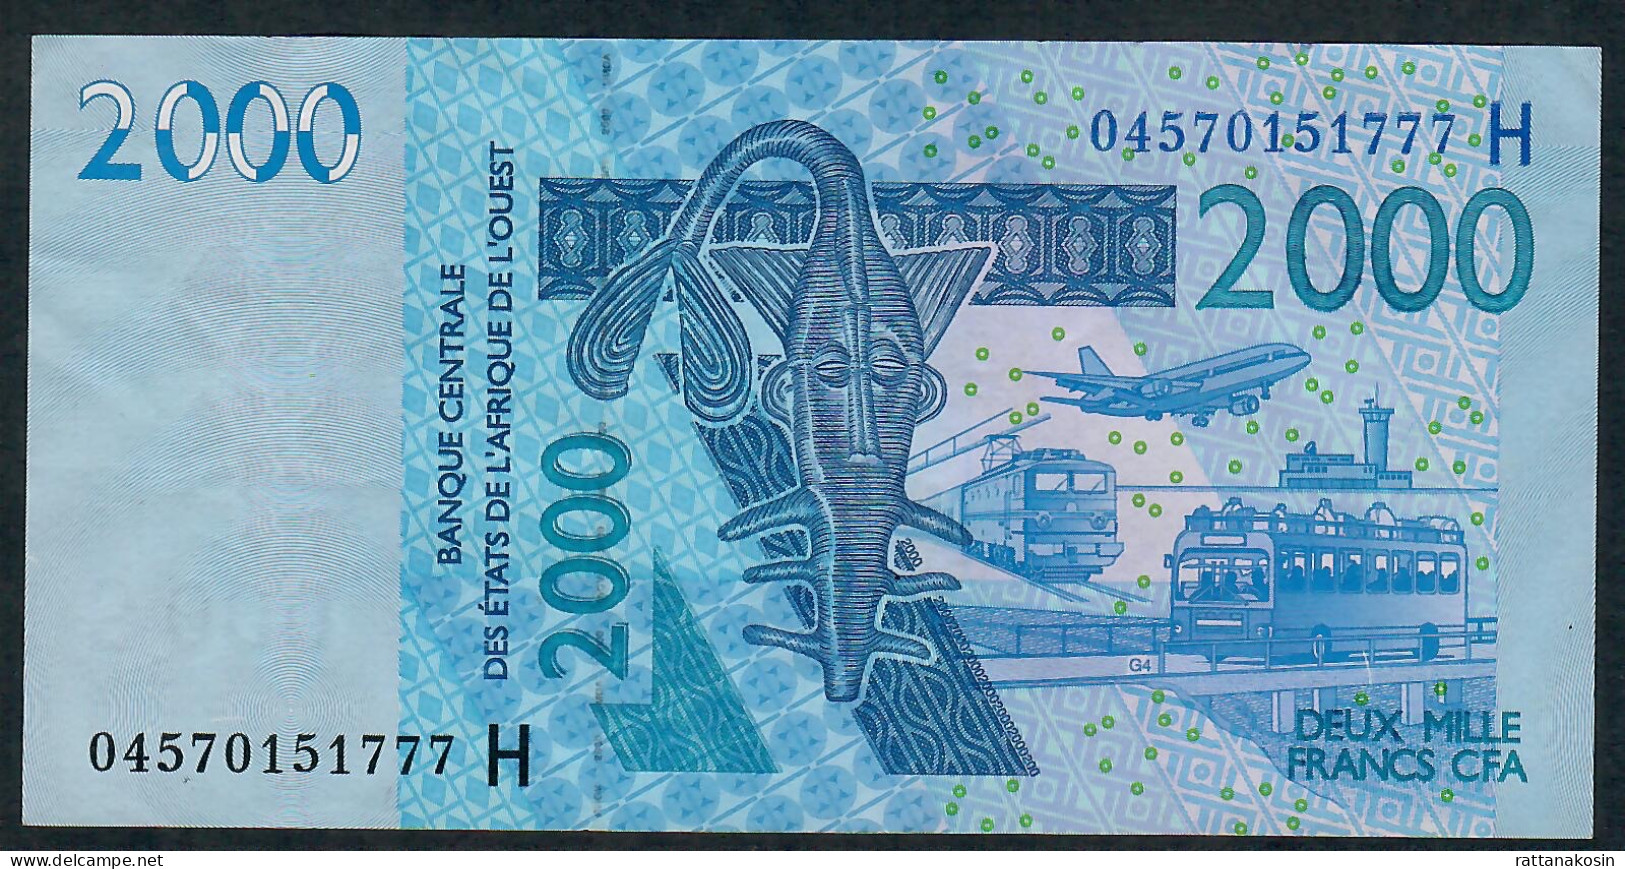 W.A.S. NIGER P616Hb 2000 FRANCS (20)04 2004 Signature 32   VF  NO P.h. - West African States